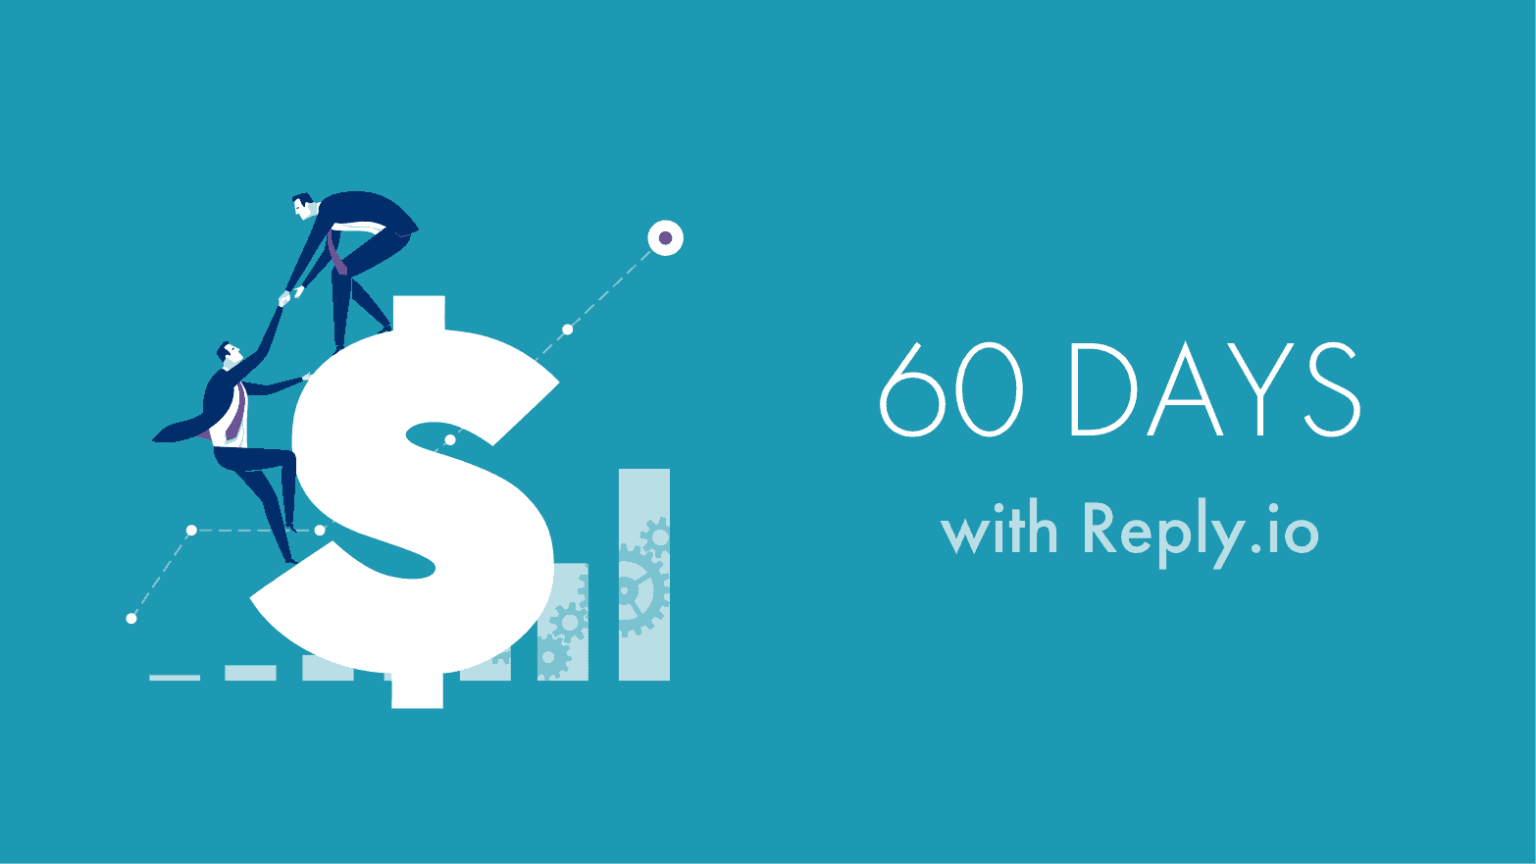 How To Get 35+ Qualified Outbound Deals In 60 Days with Reply.io